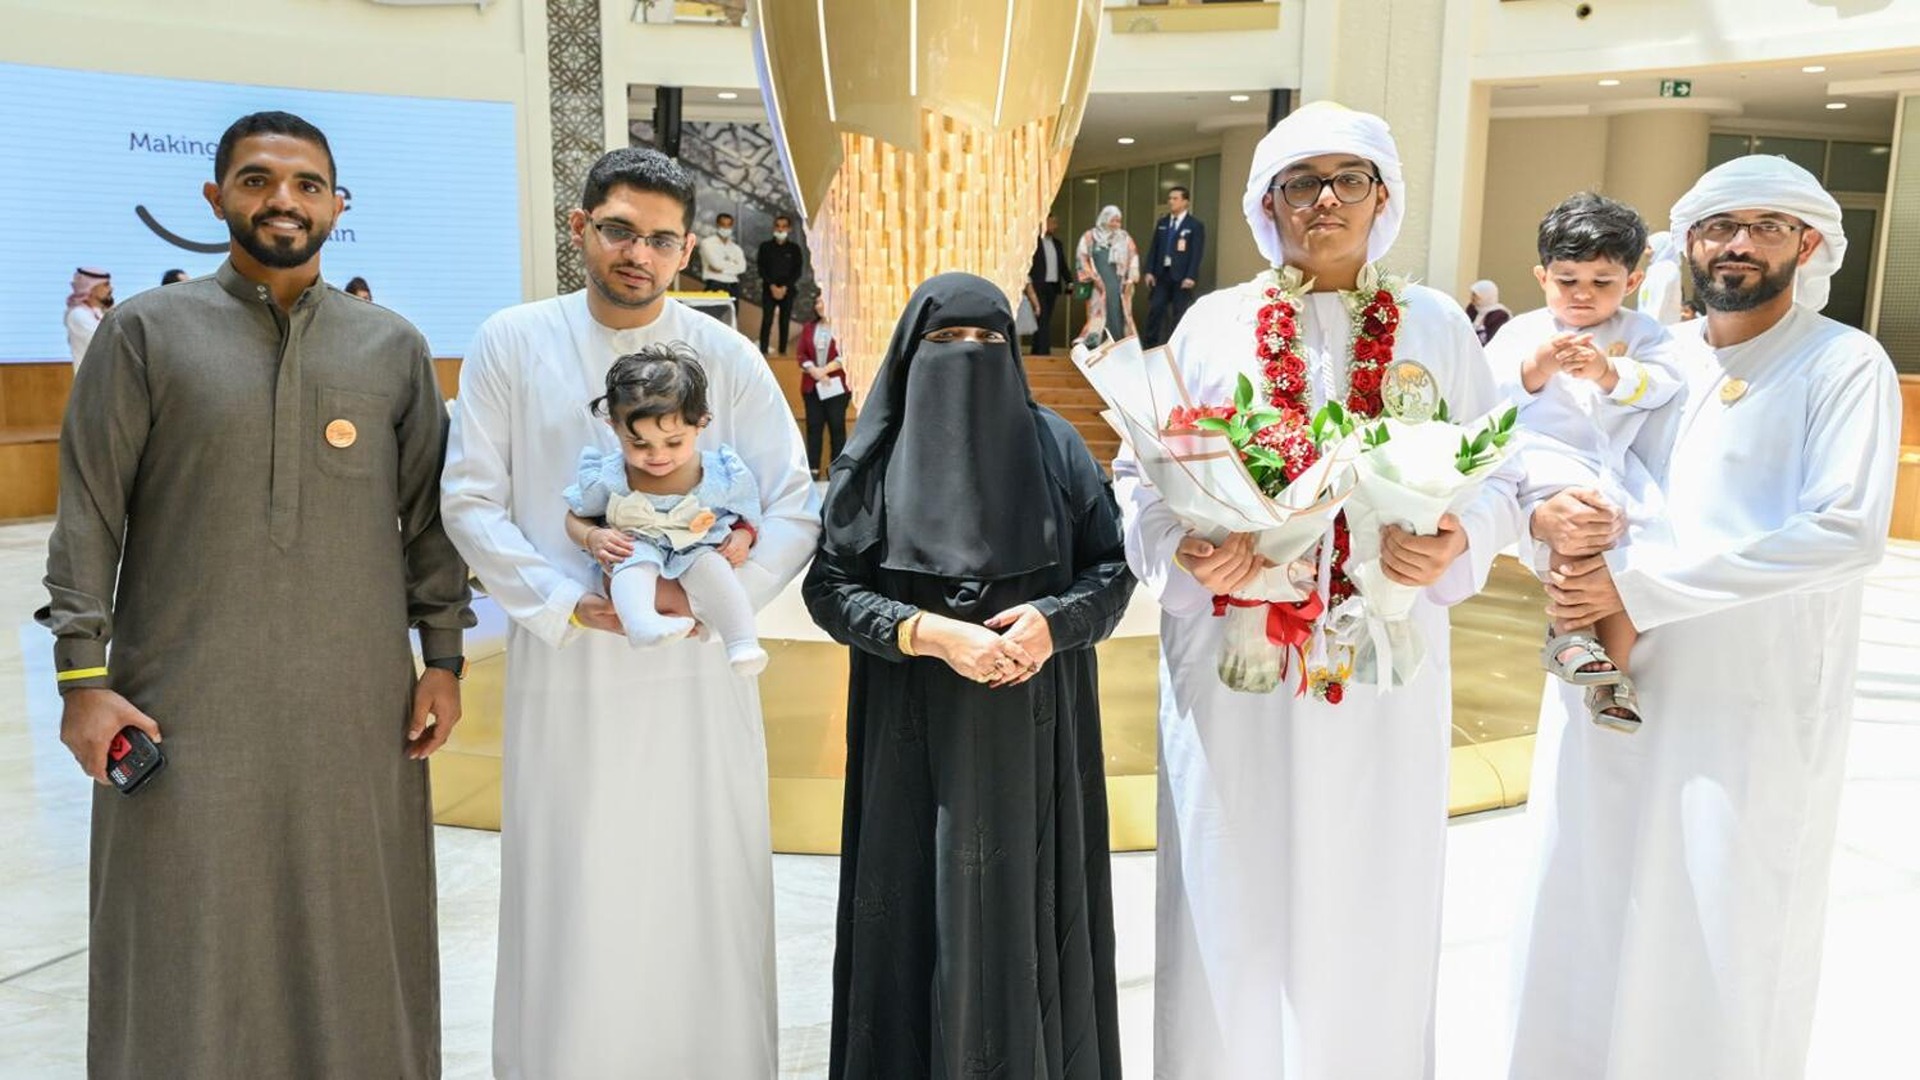 Abu Dhabi: Meet Emirati boy who triumphs over cancer, aspires to serve in the army.